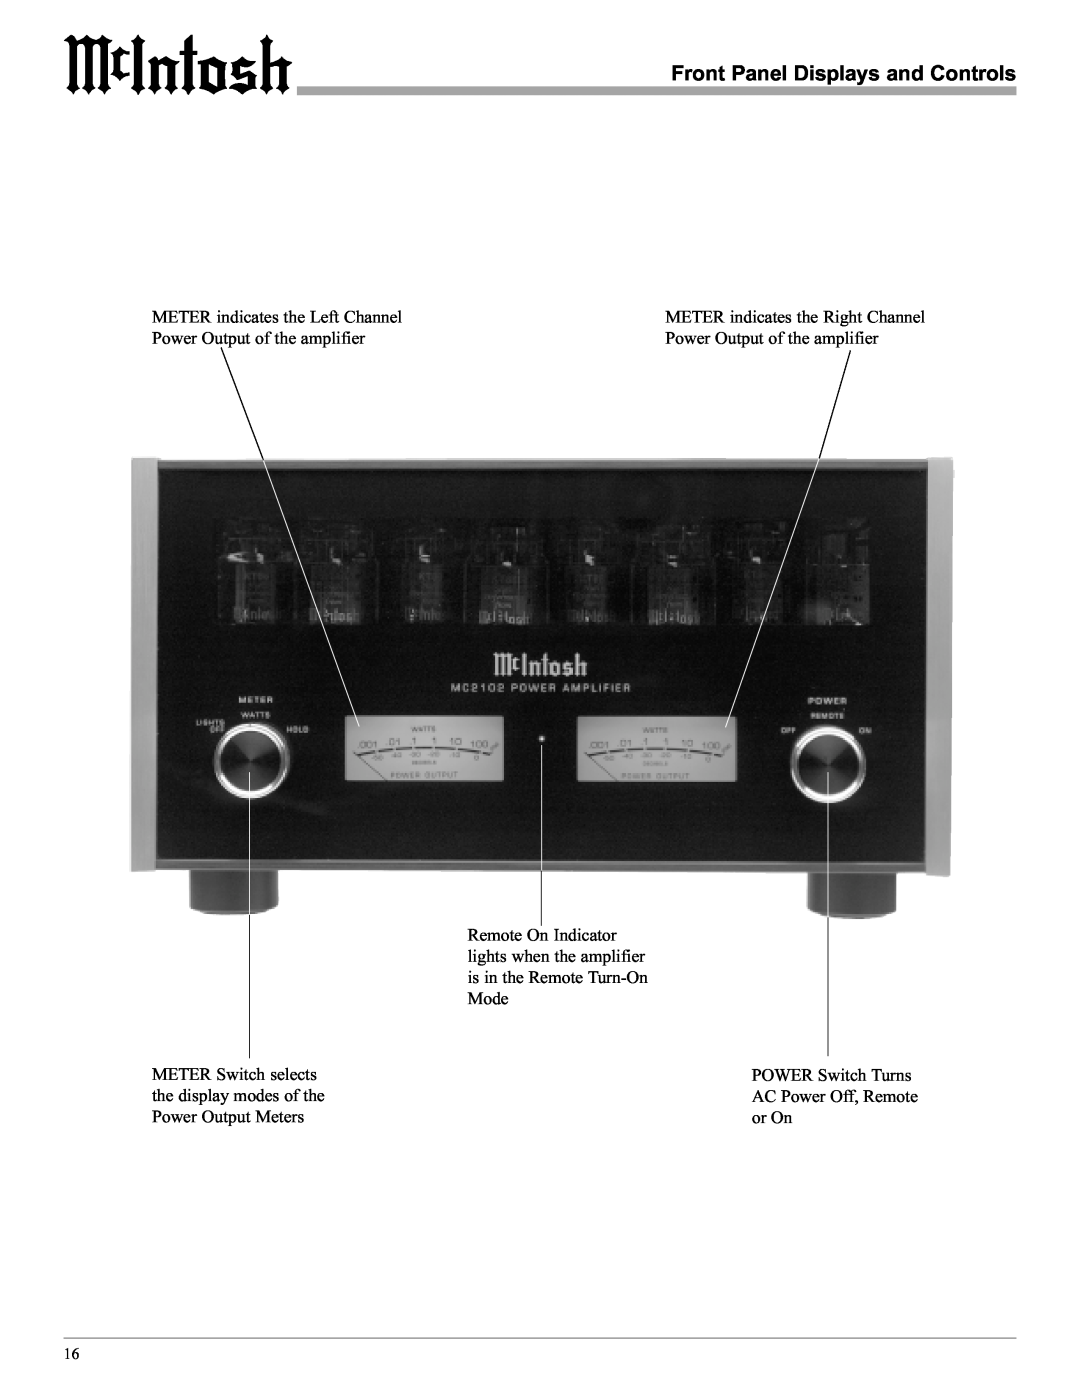 McIntosh MC2102 manual Front Panel Displays and Controls, METER indicates the Right Channel, Power Output of the amplifier 